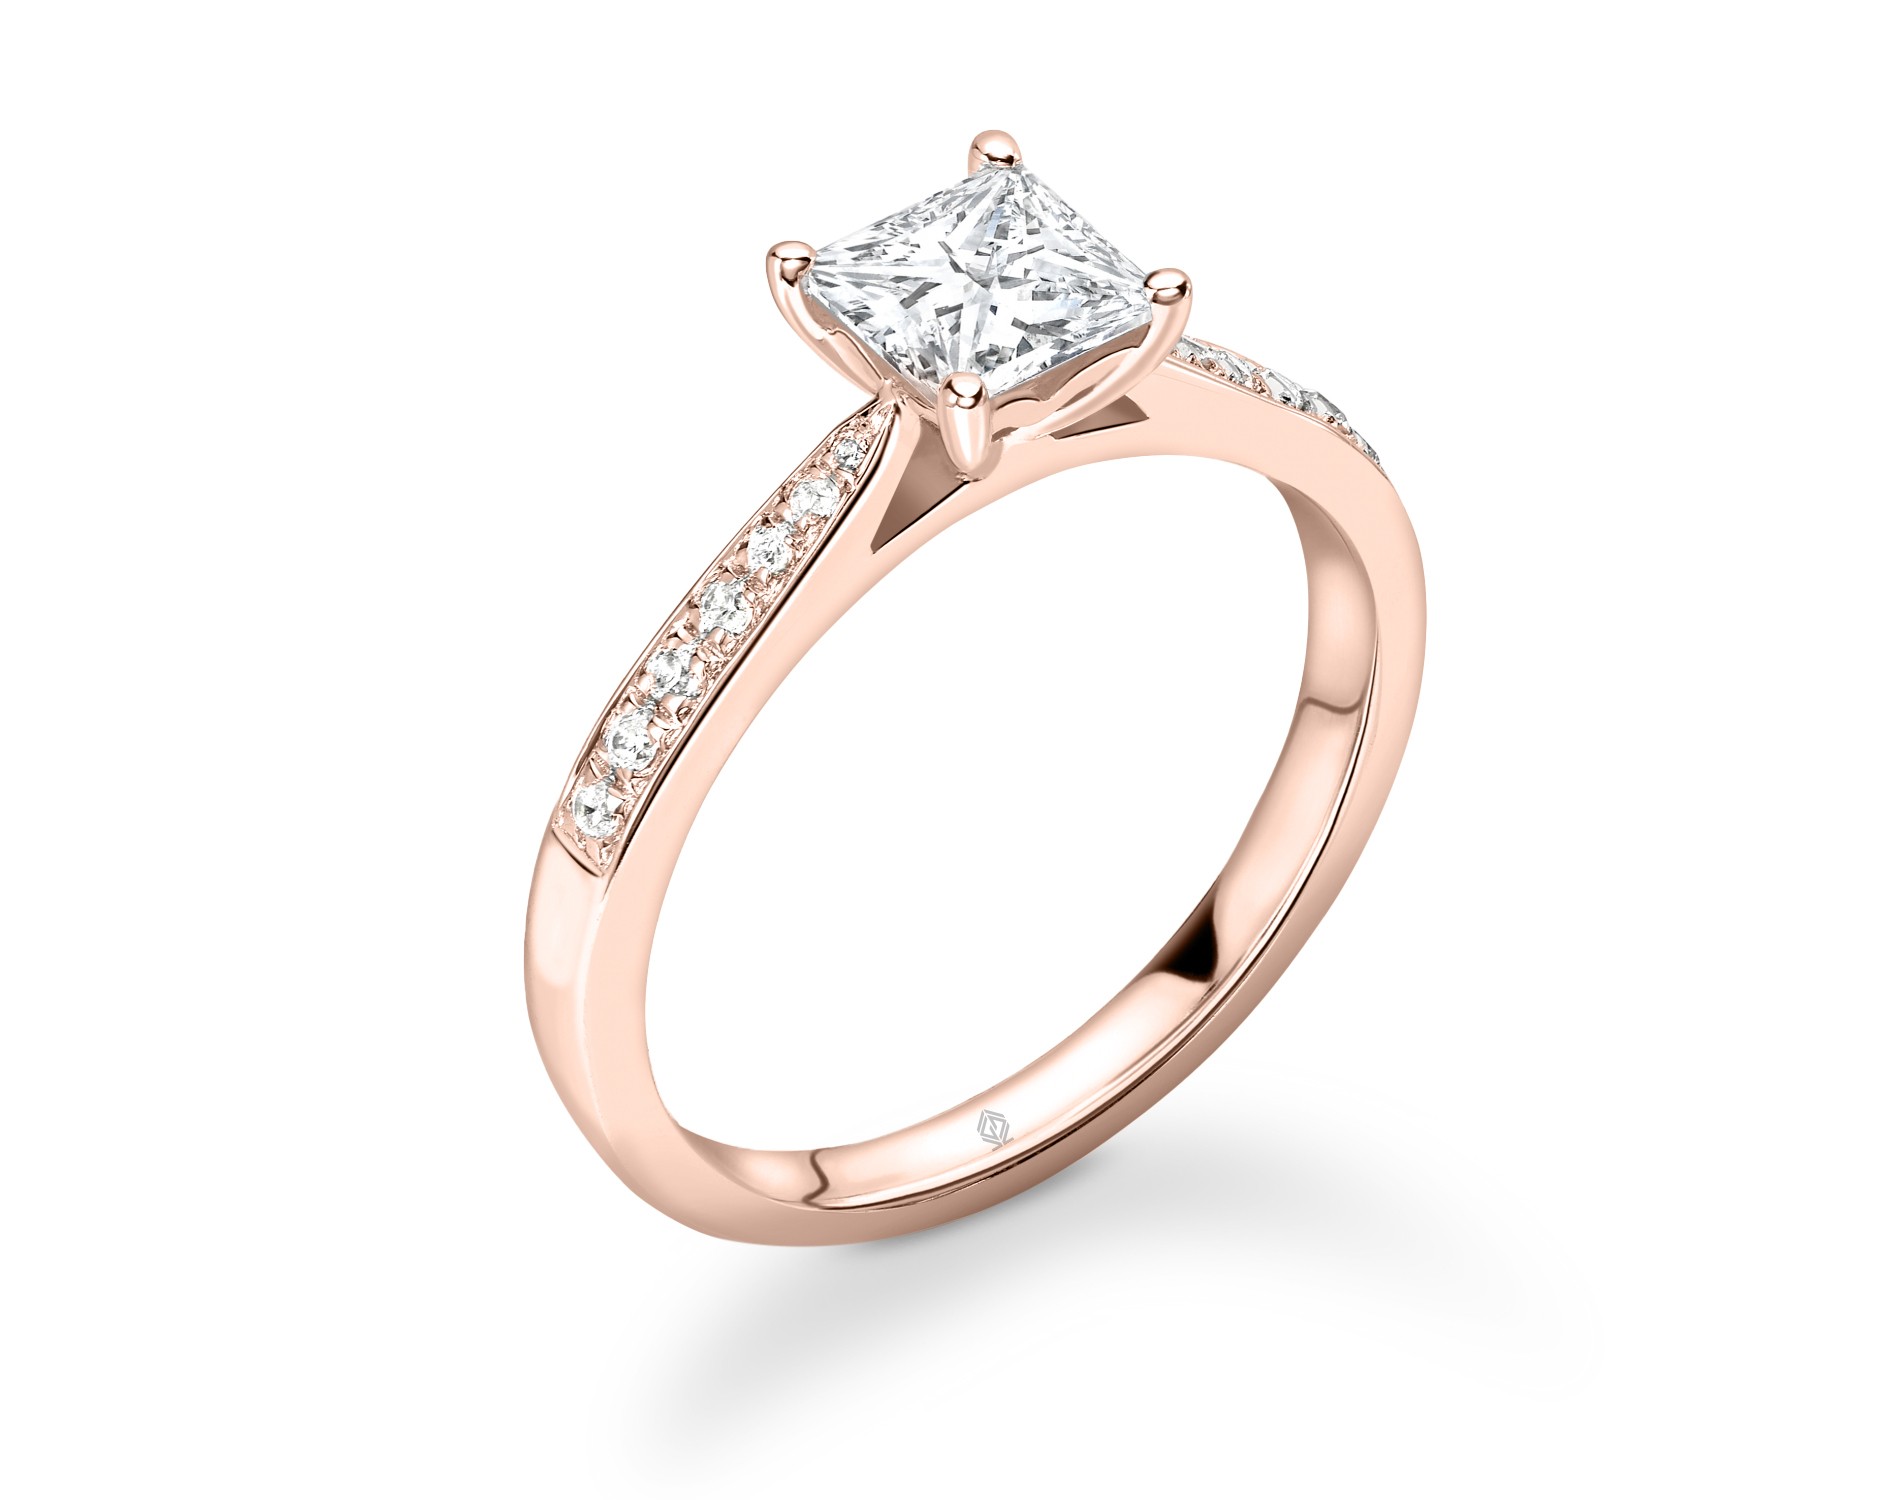 18K ROSE GOLD PRINCESS CUT DIAMOND ENGAGEMENT RING WITH SIDE STONES CHANNEL SET